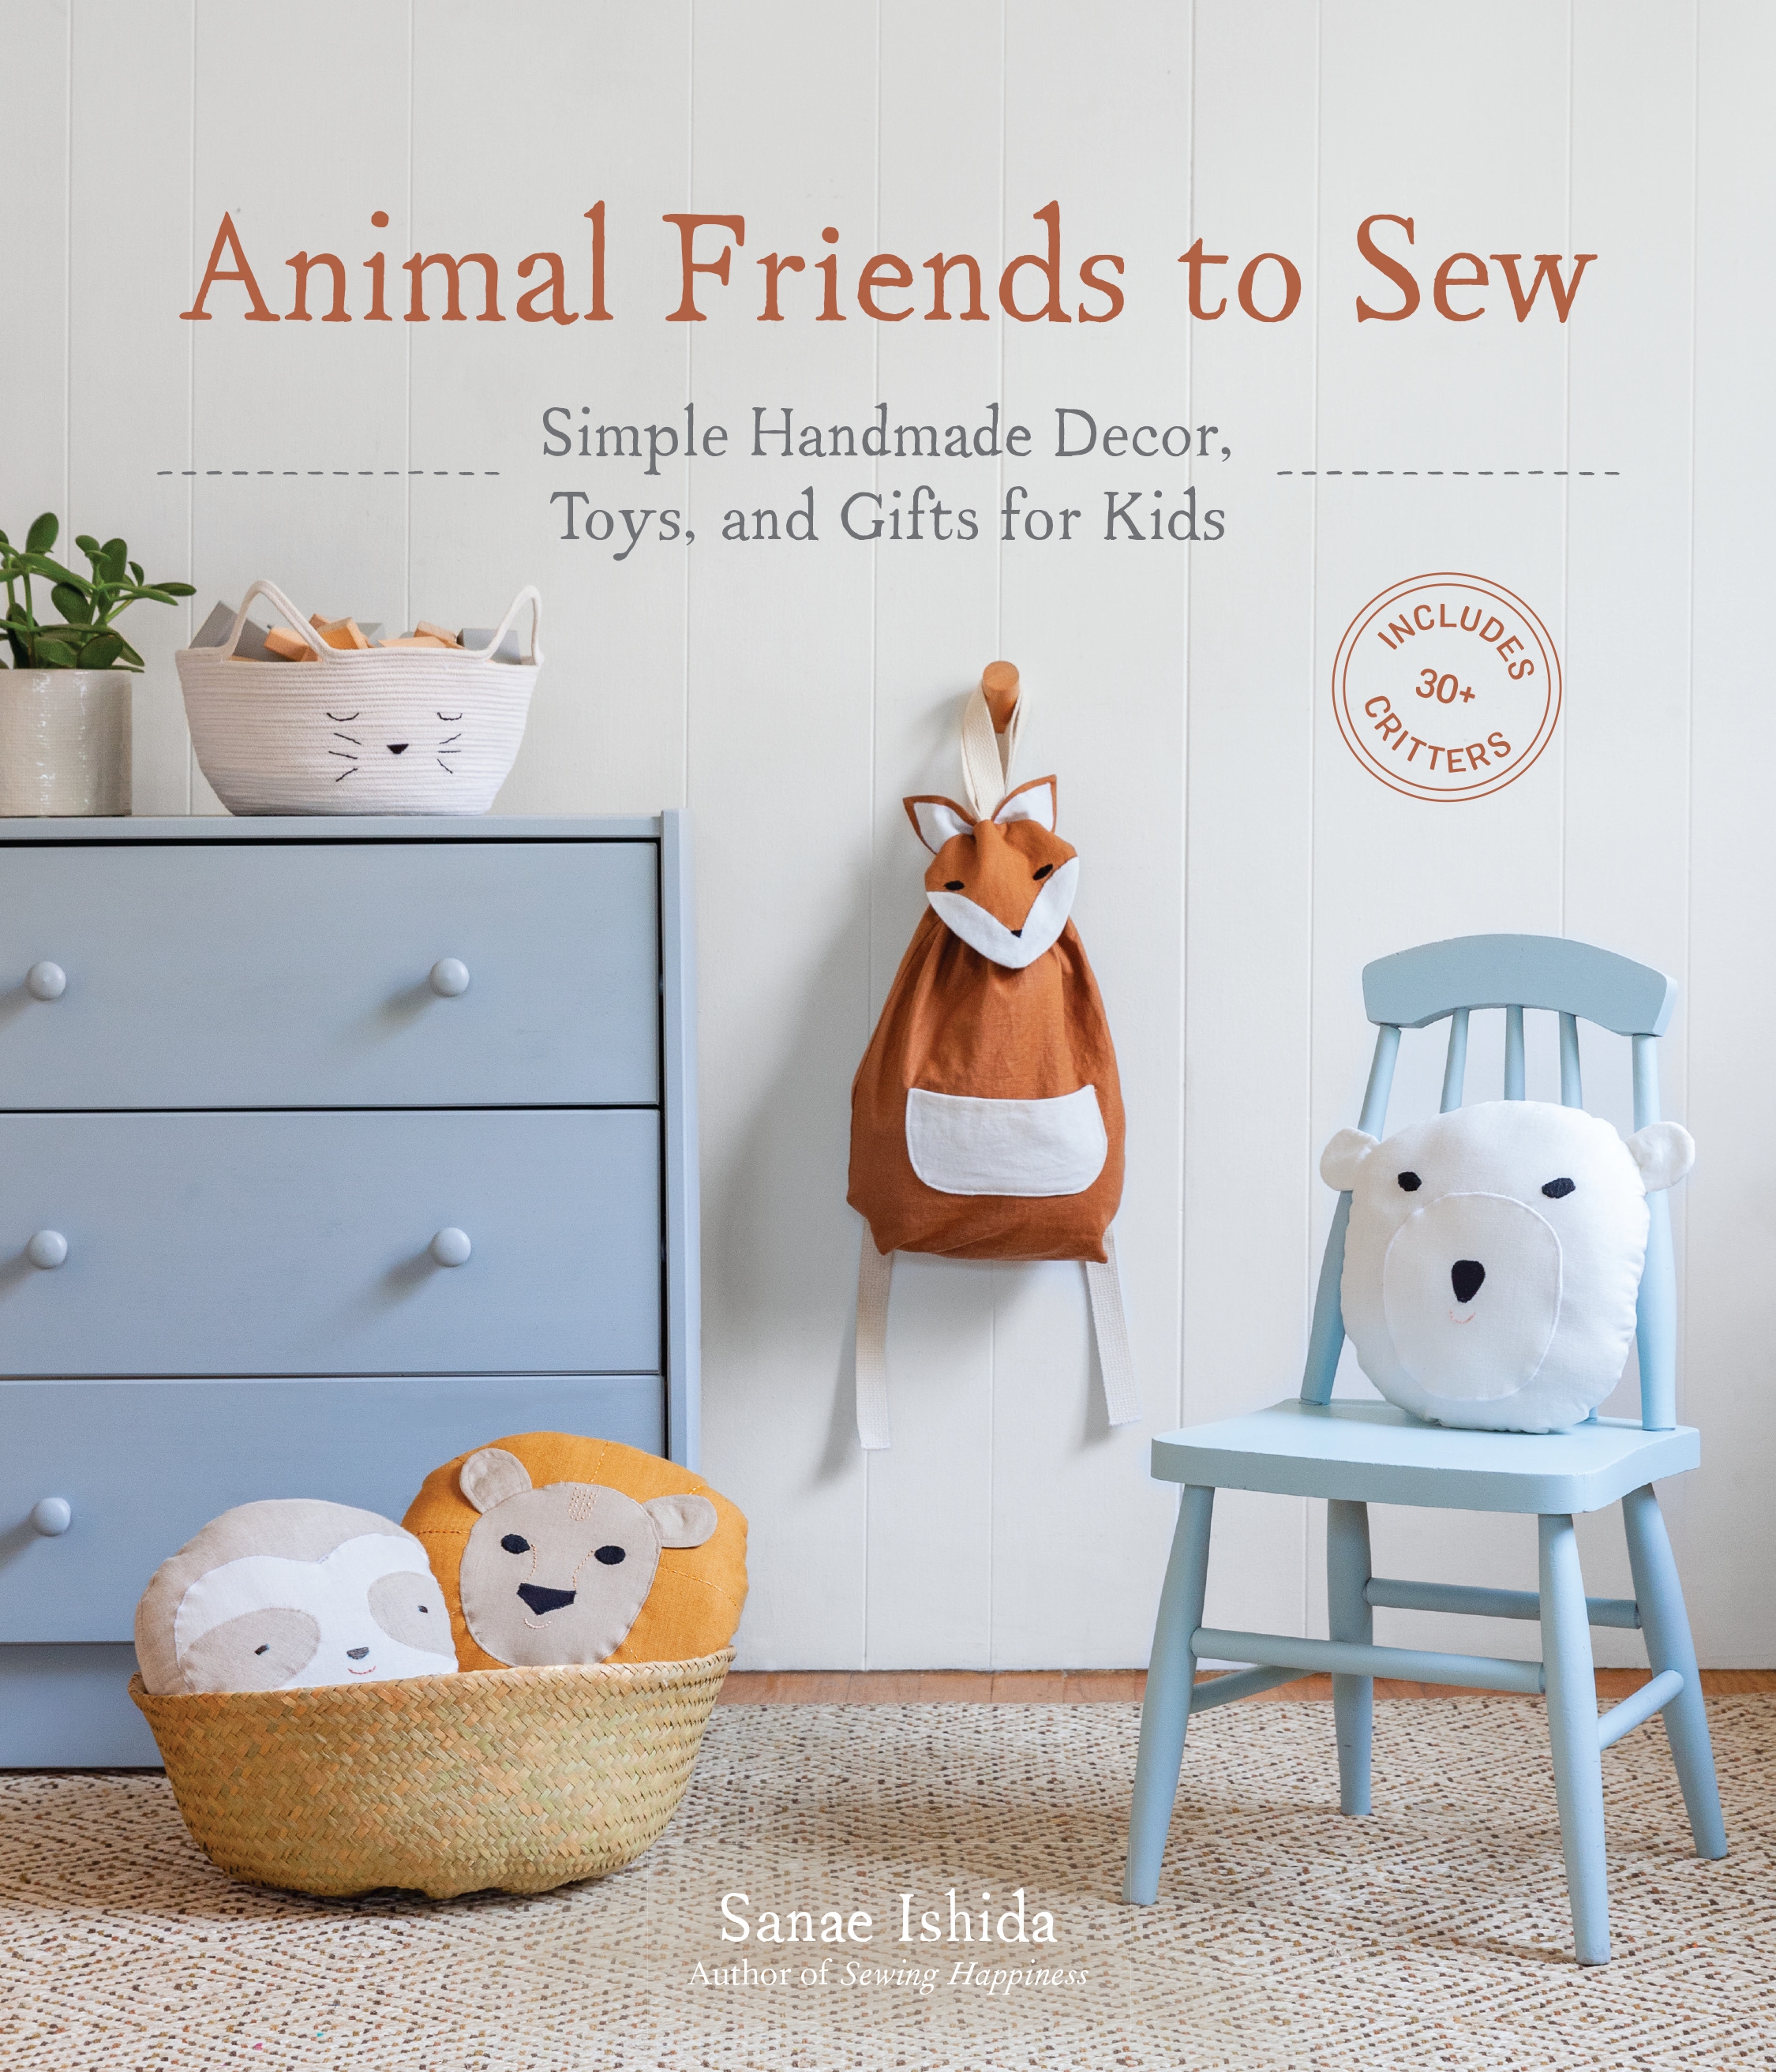 Animal Friends To Sew: Simple Handmade Decor, Toys, and Gifts for Kids